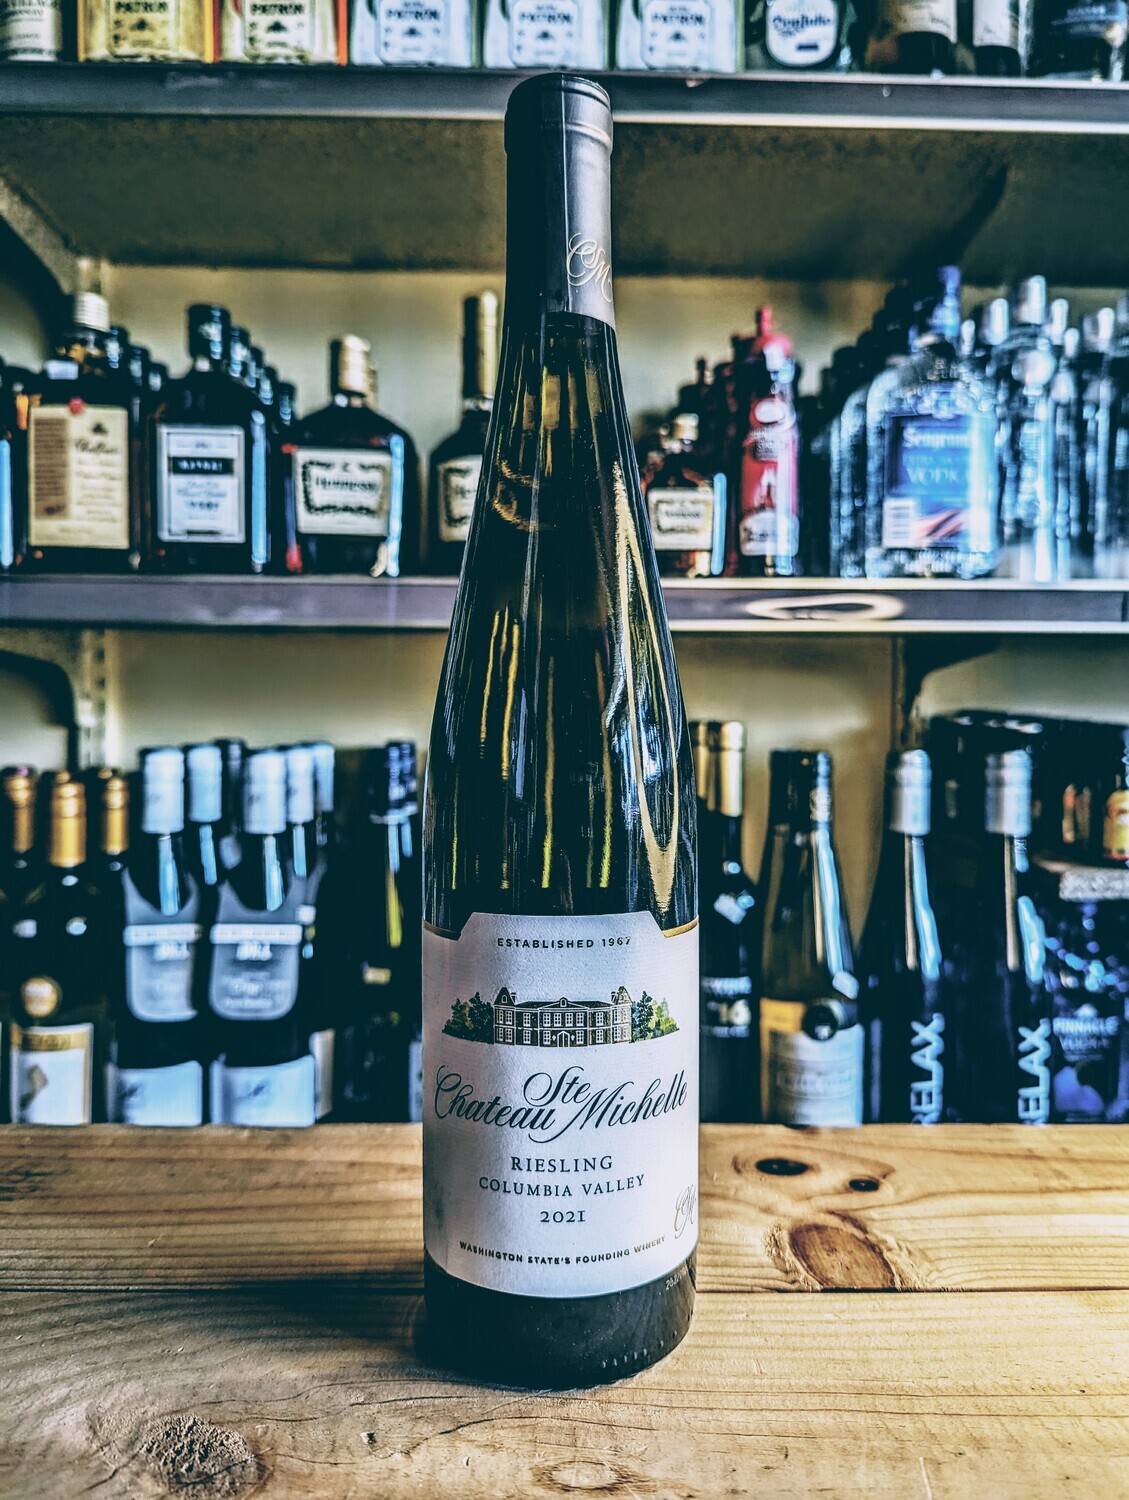 Chateau Ste Michelle Riesling 750ml